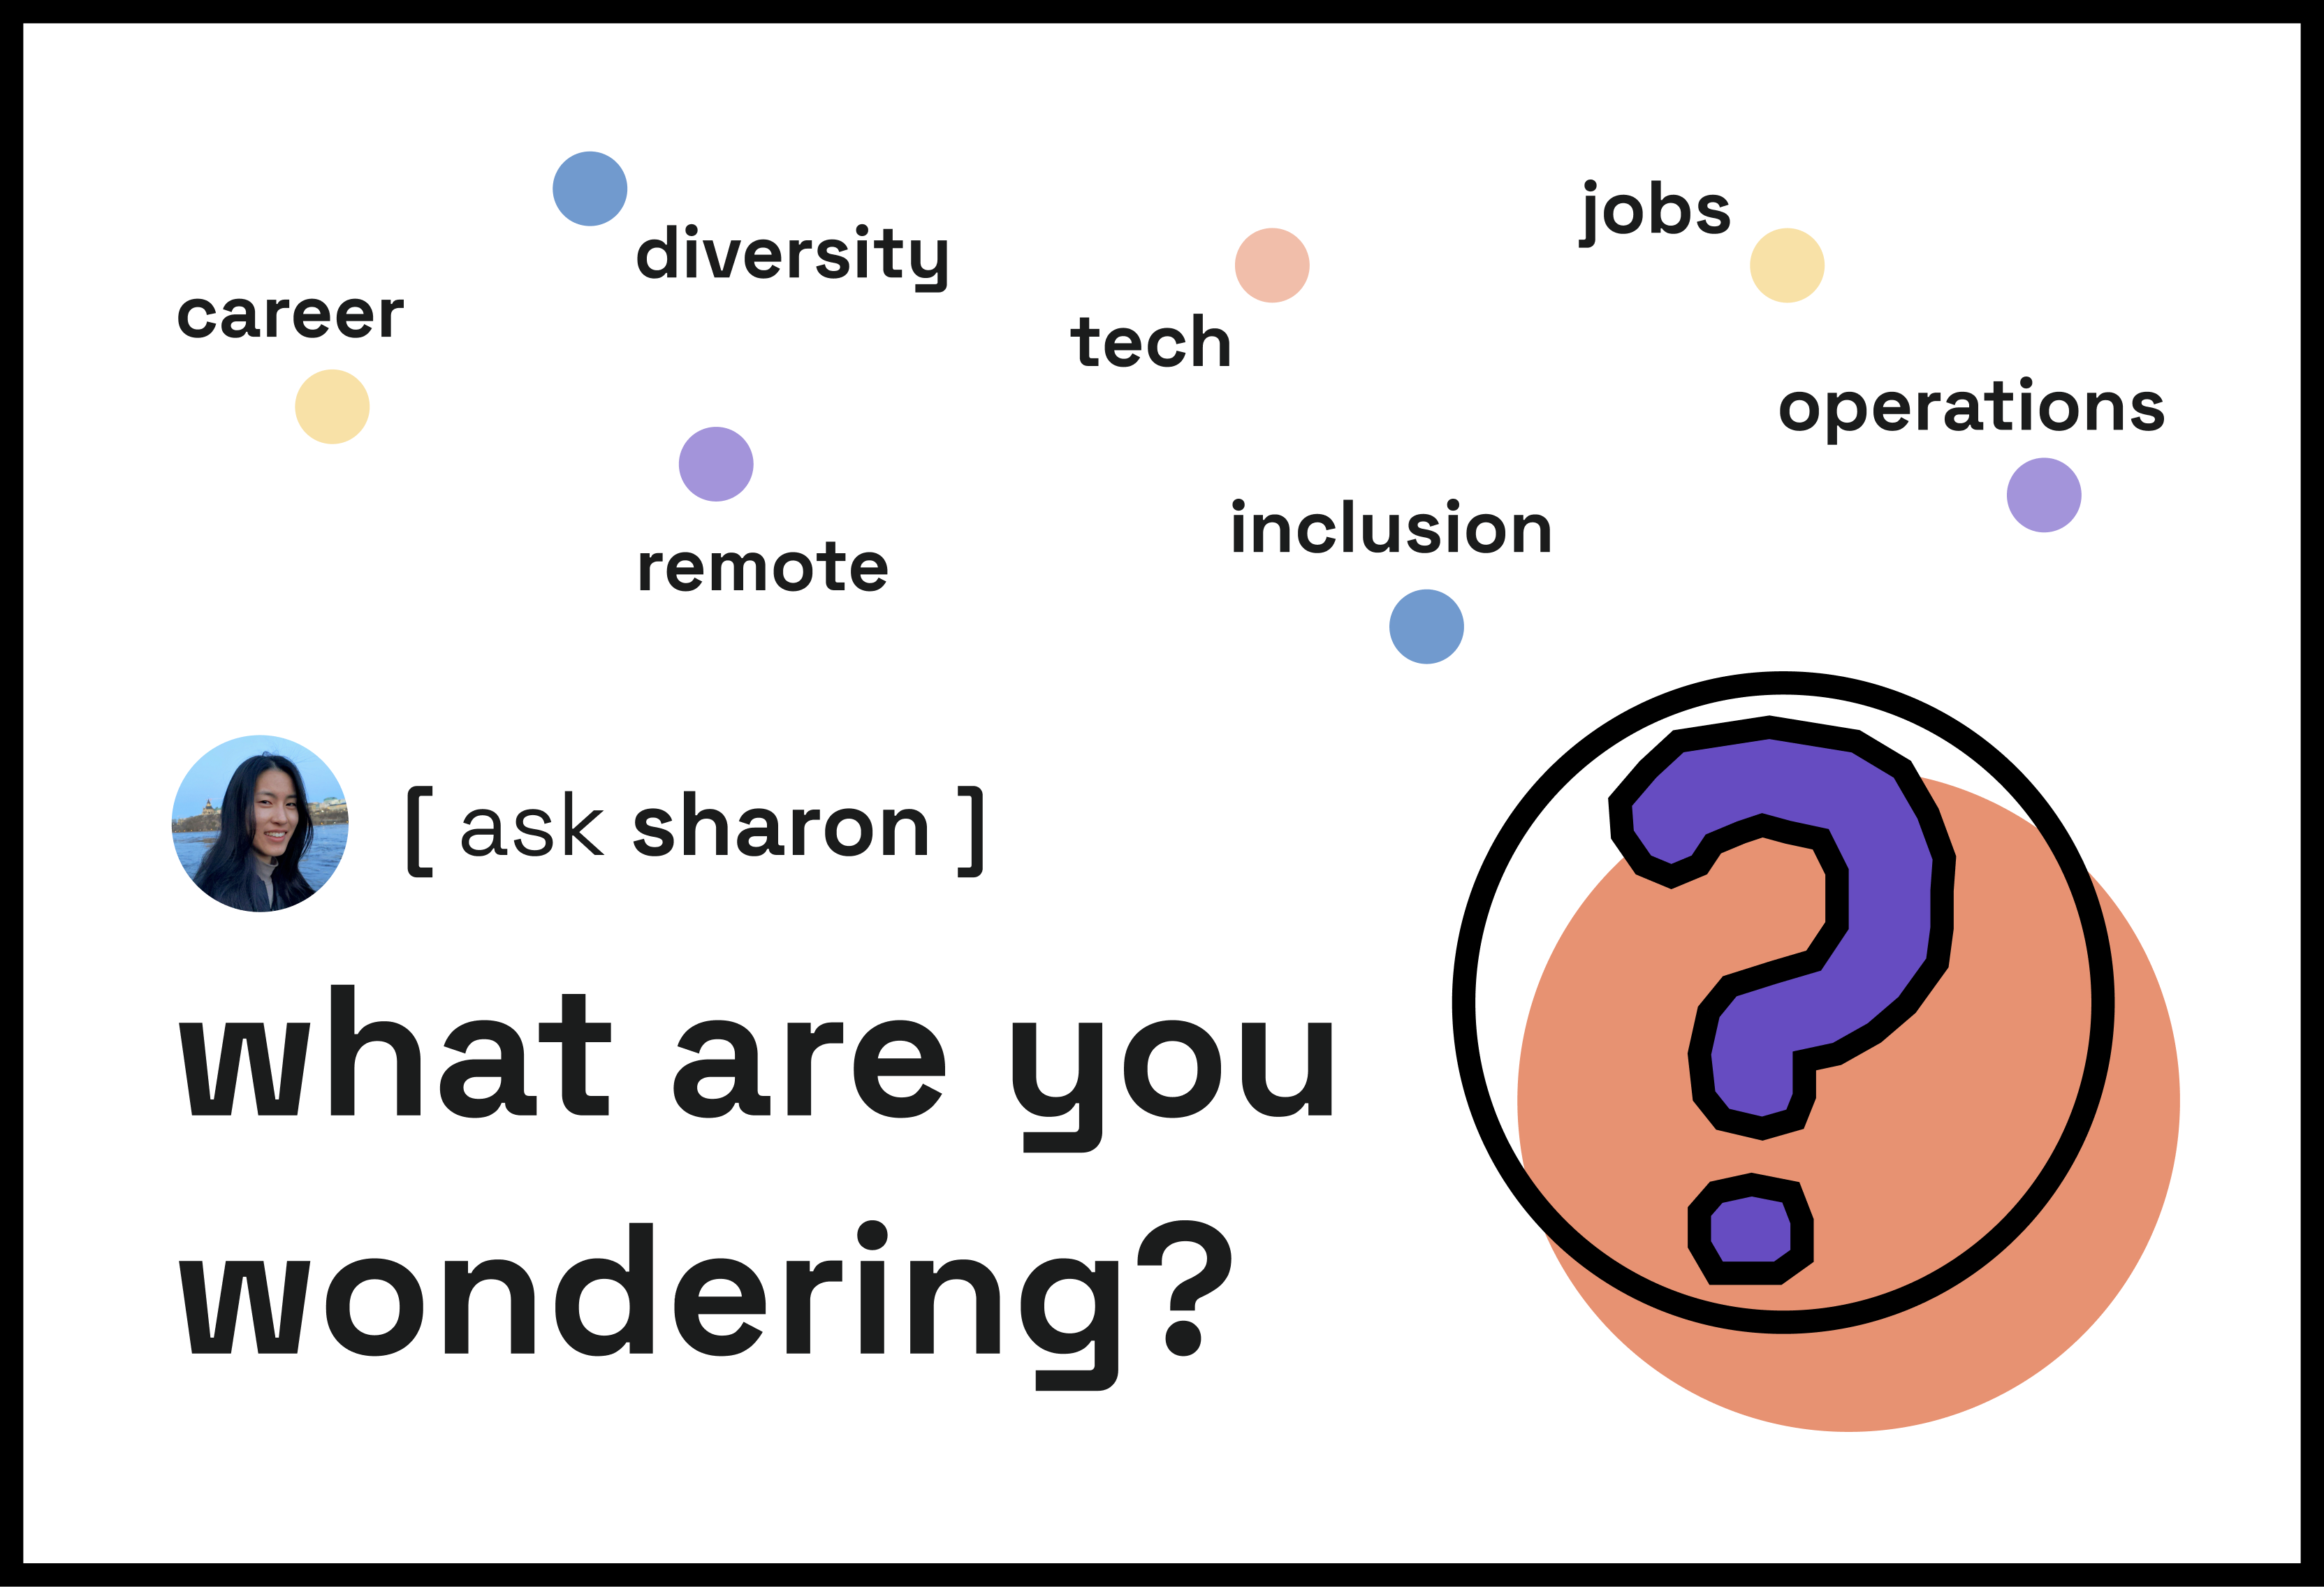 Sharon's profile photo with a small subtitle "ask sharon" and a main title "what are you wondering?". There is a large question mark graphic to evoke curiosity and confusion. A few topical suggestions are provided: career, diversity, remote, tech, inclusion, jobs, operations.